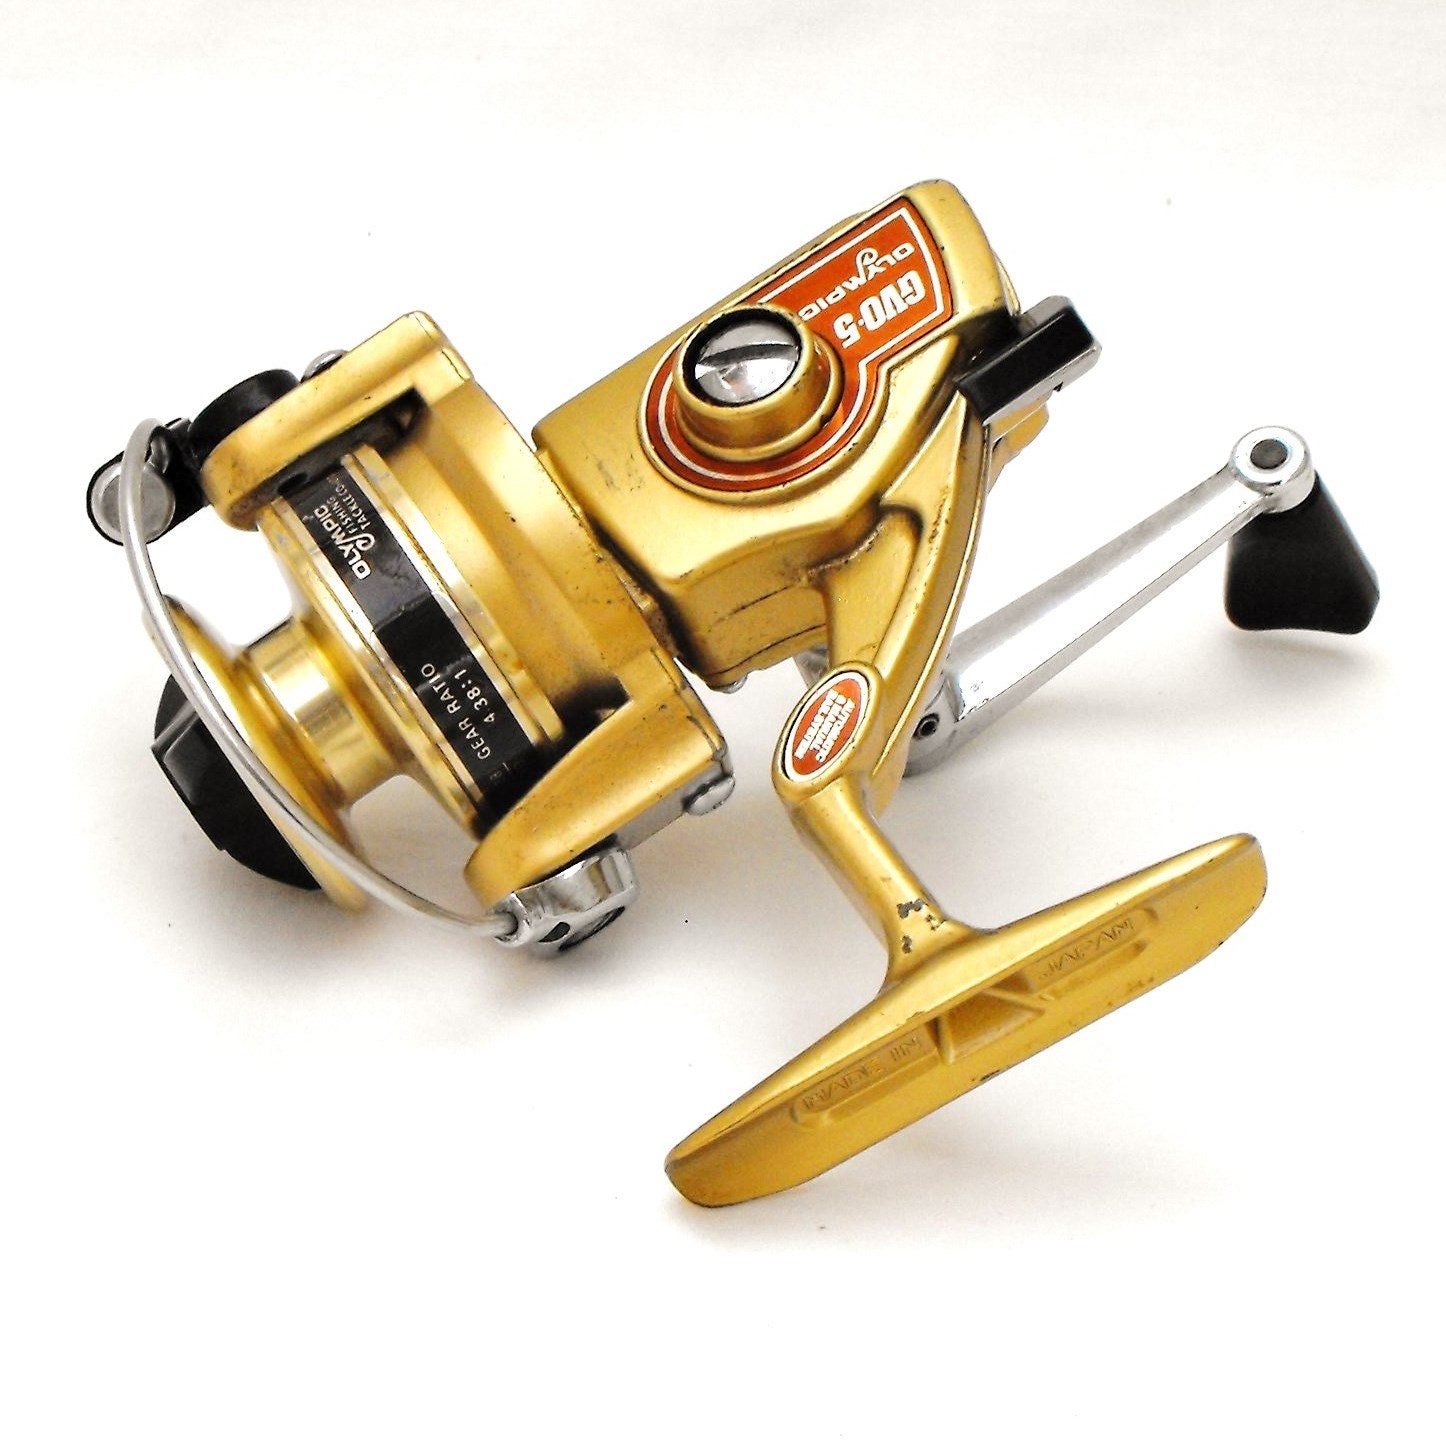 Olympic GVO-5 Small Spinning Reel, Ultra-lite Vintage 1980s Fishing Gear,  Made in Japan Die Cast, Very Good Pre-owned Working Condition -   Singapore